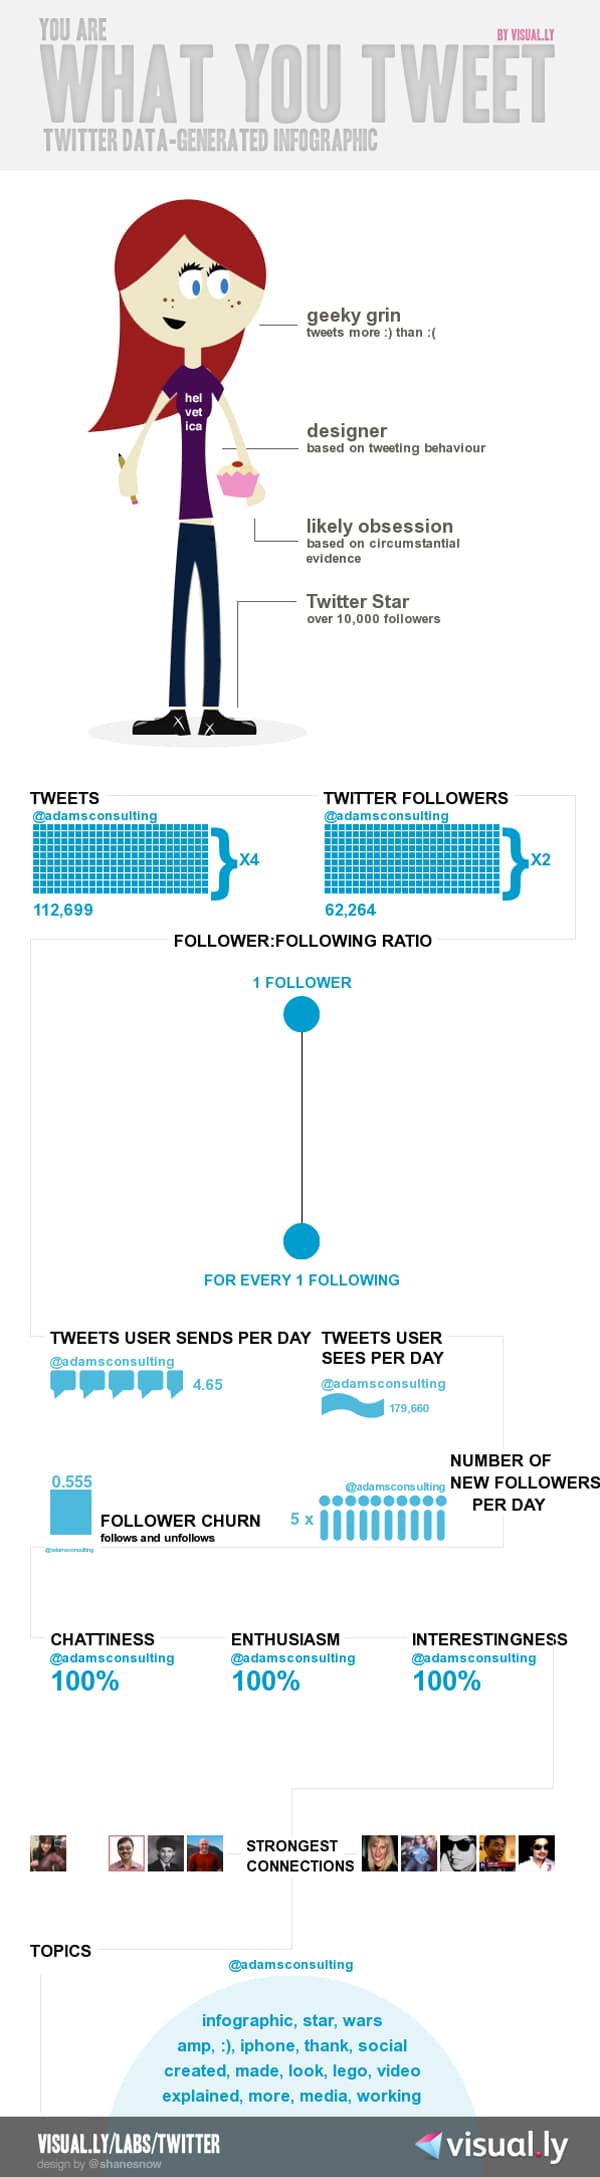 You Are What You Tweet [Infographic Generator]